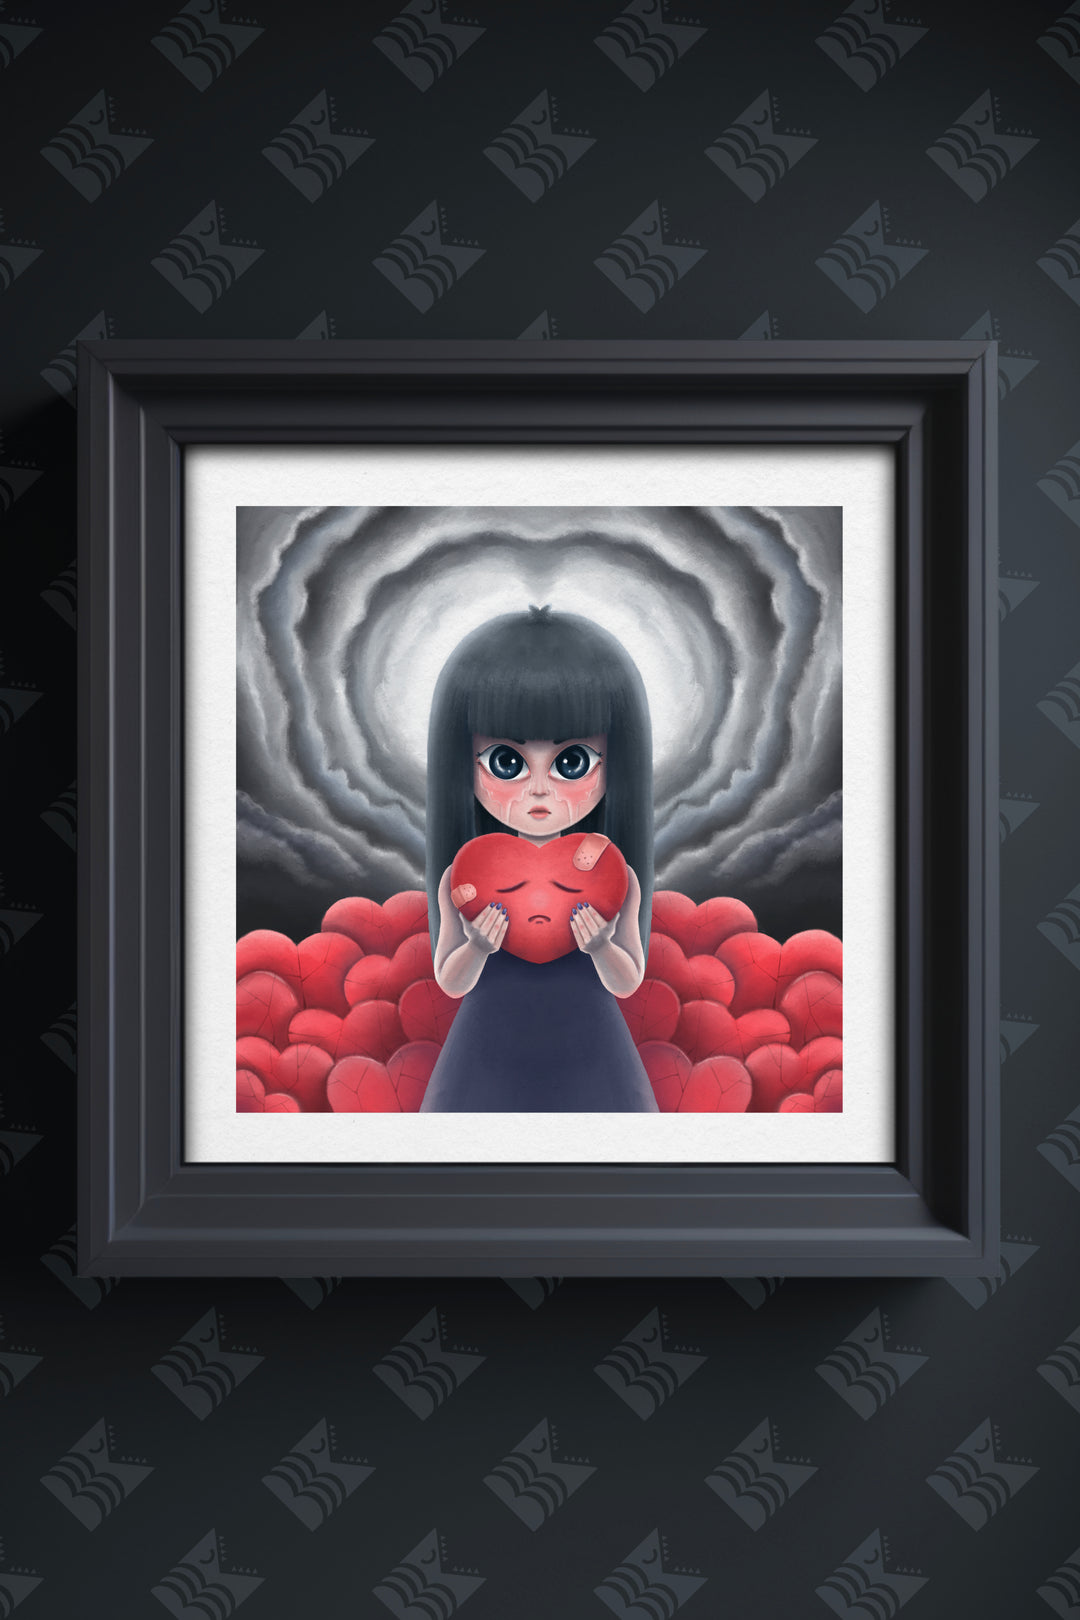 An artwork in a cute but surreal style depicts a pale-skinned girl with tears streaming from her eyes. She holds a heart with a sad face, which is bandaged. In the background, a pile of broken hearts is scattered across the ground, and the sky above is a dark shade of grey, evoking a somber and melancholic atmosphere.